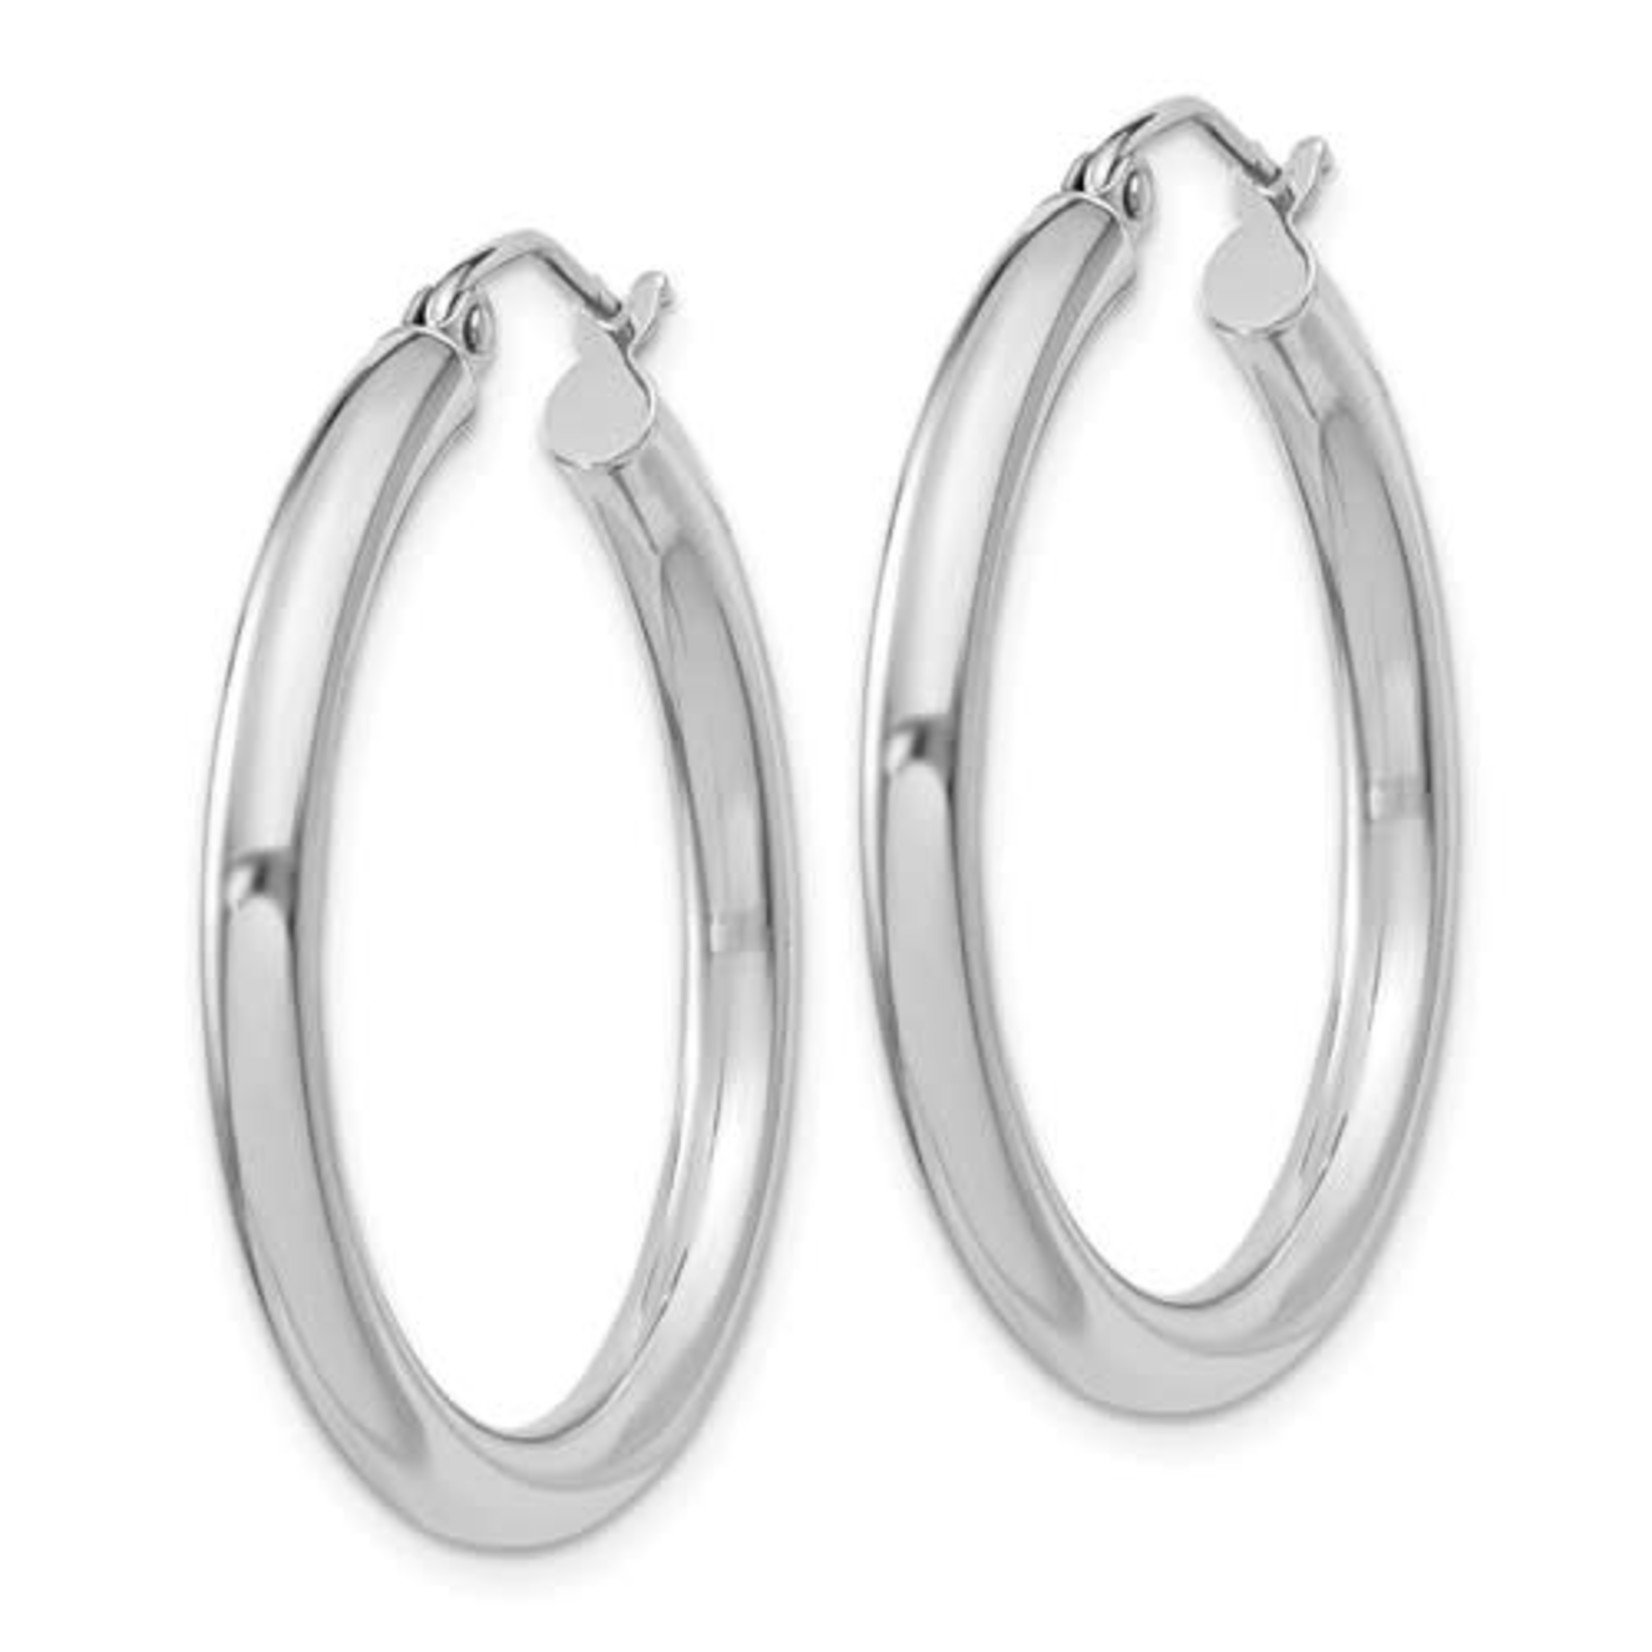 QUALITY GOLD OF CINCINNATI INC Sterling Silver Rhodium Plated 3x30mm Round Hoops